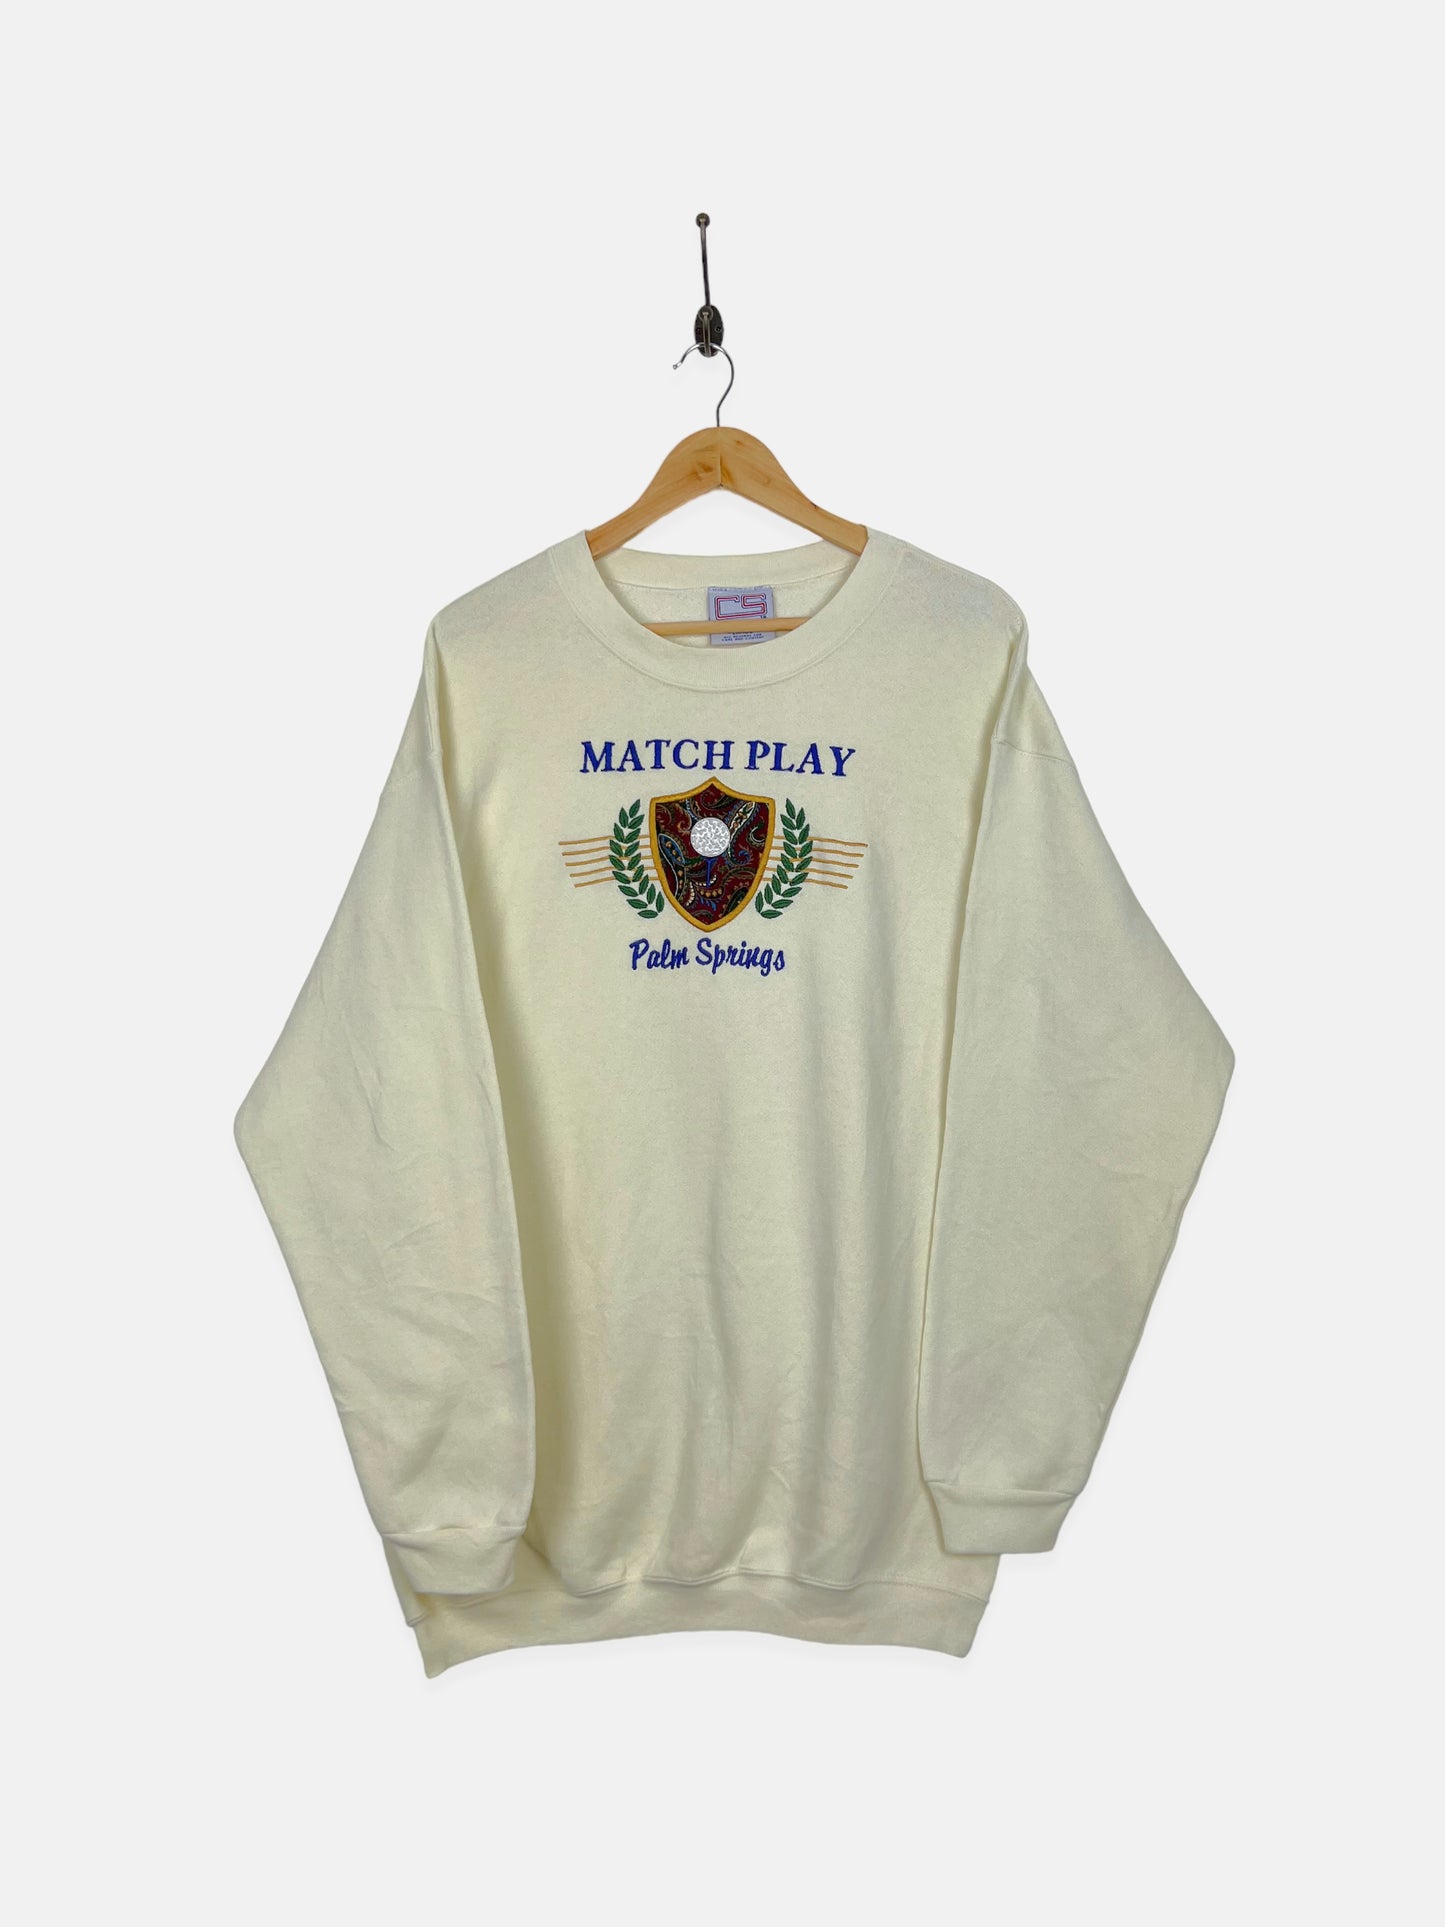 90's Matchplay Palm Springs USA Made Embroidered Vintage Sweatshirt Size L